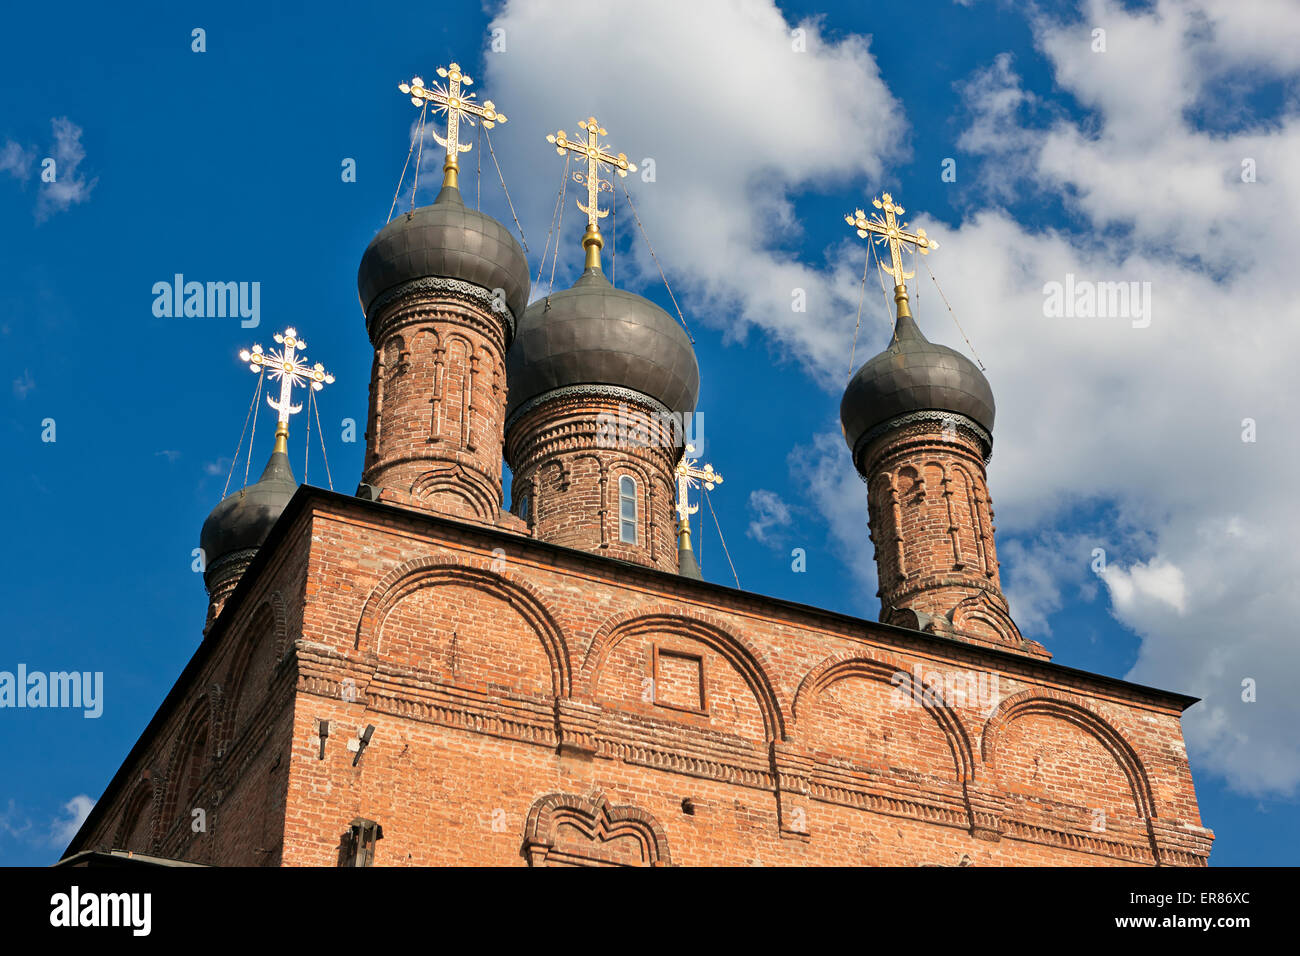 The Assumption Cathedral. Krutitskoe Podvorie, Moscow, Russia. Stock Photo